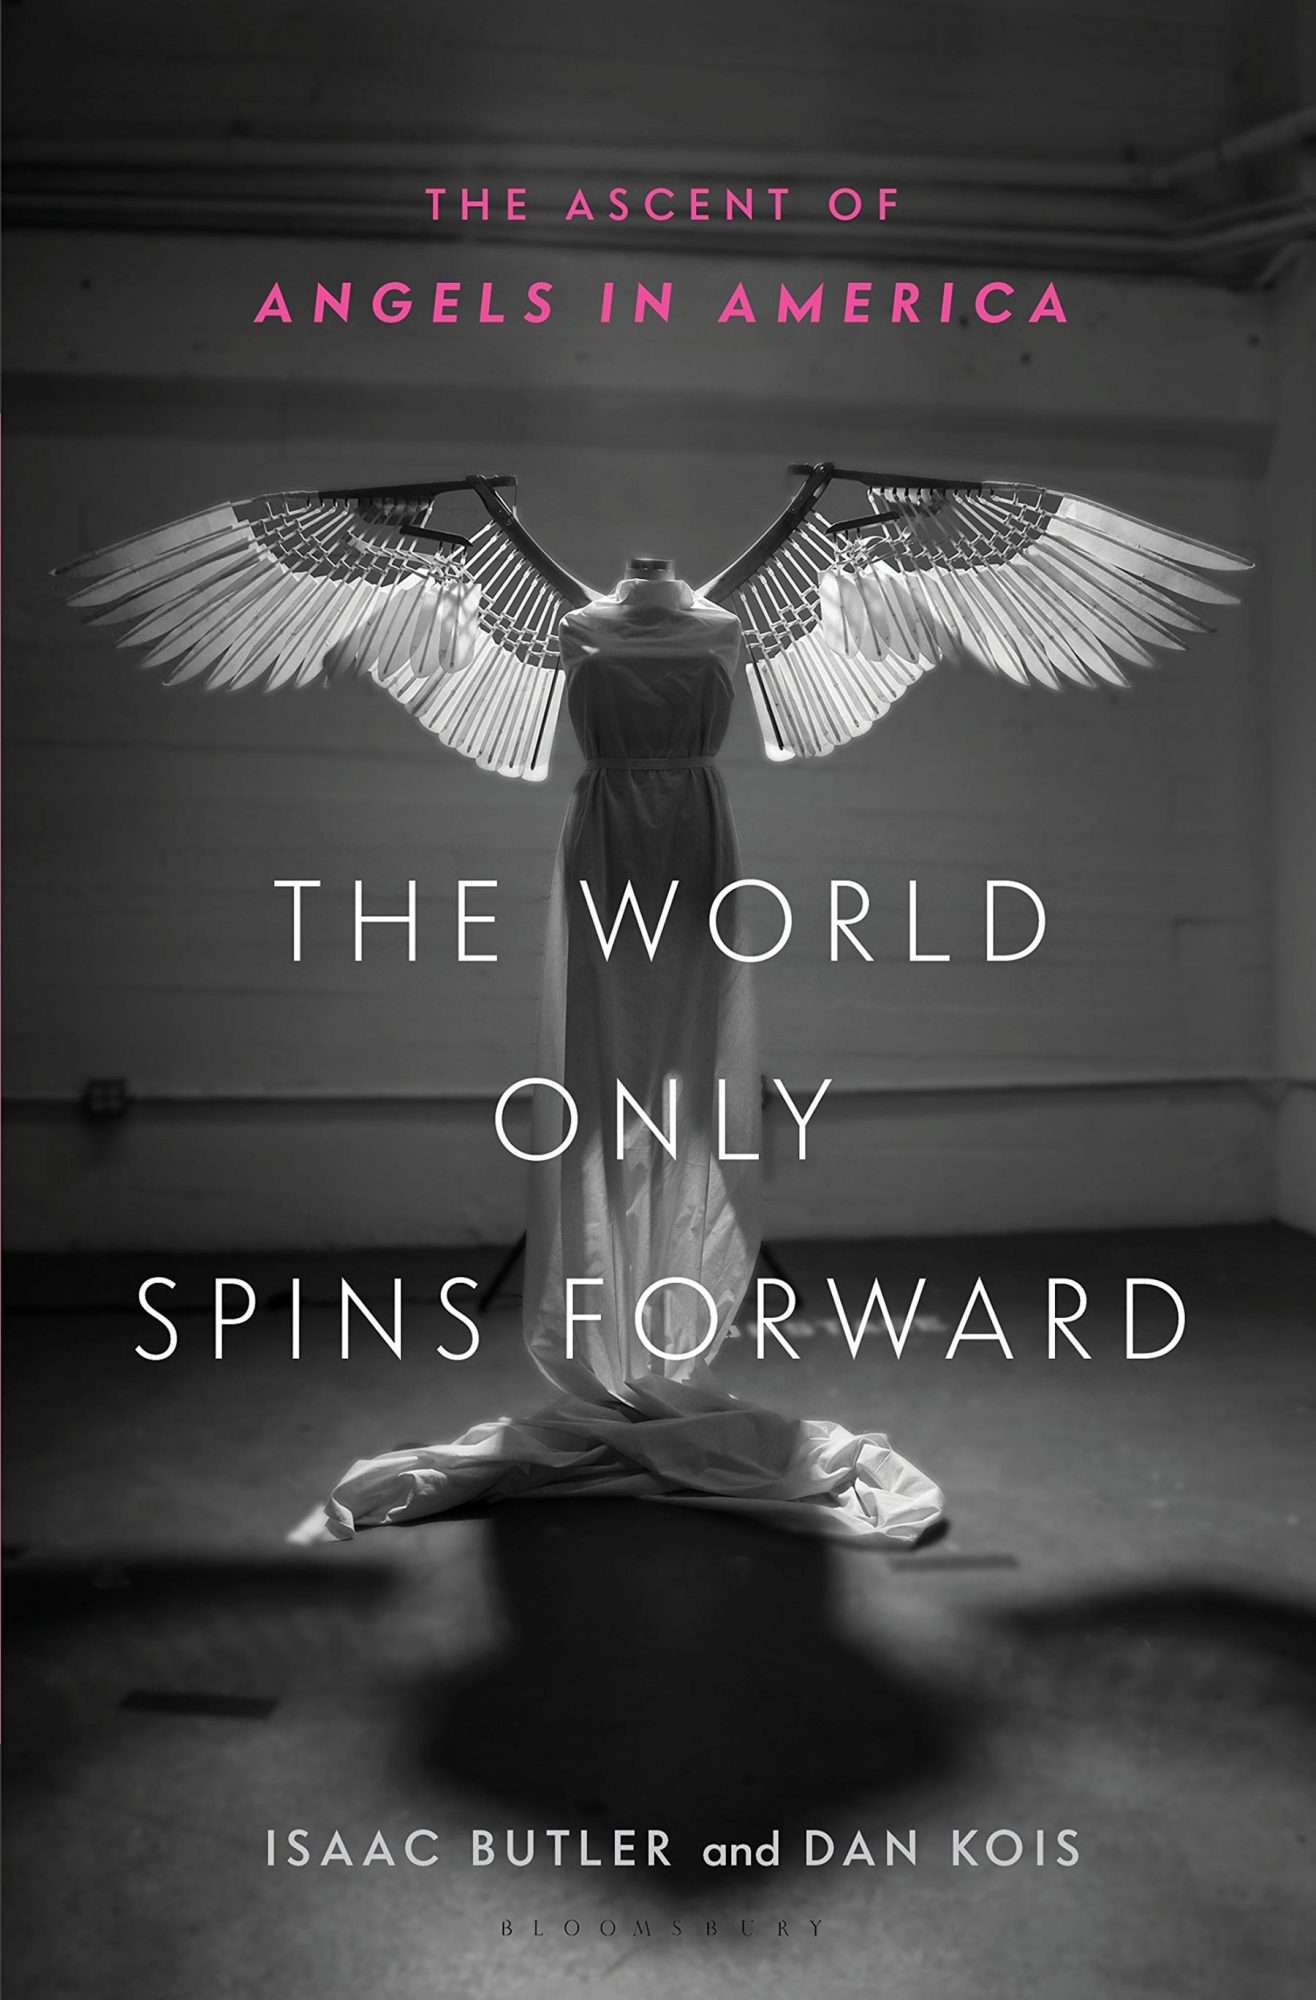 The World Only Spins Forward, by Isaac Butler and Dan Kois